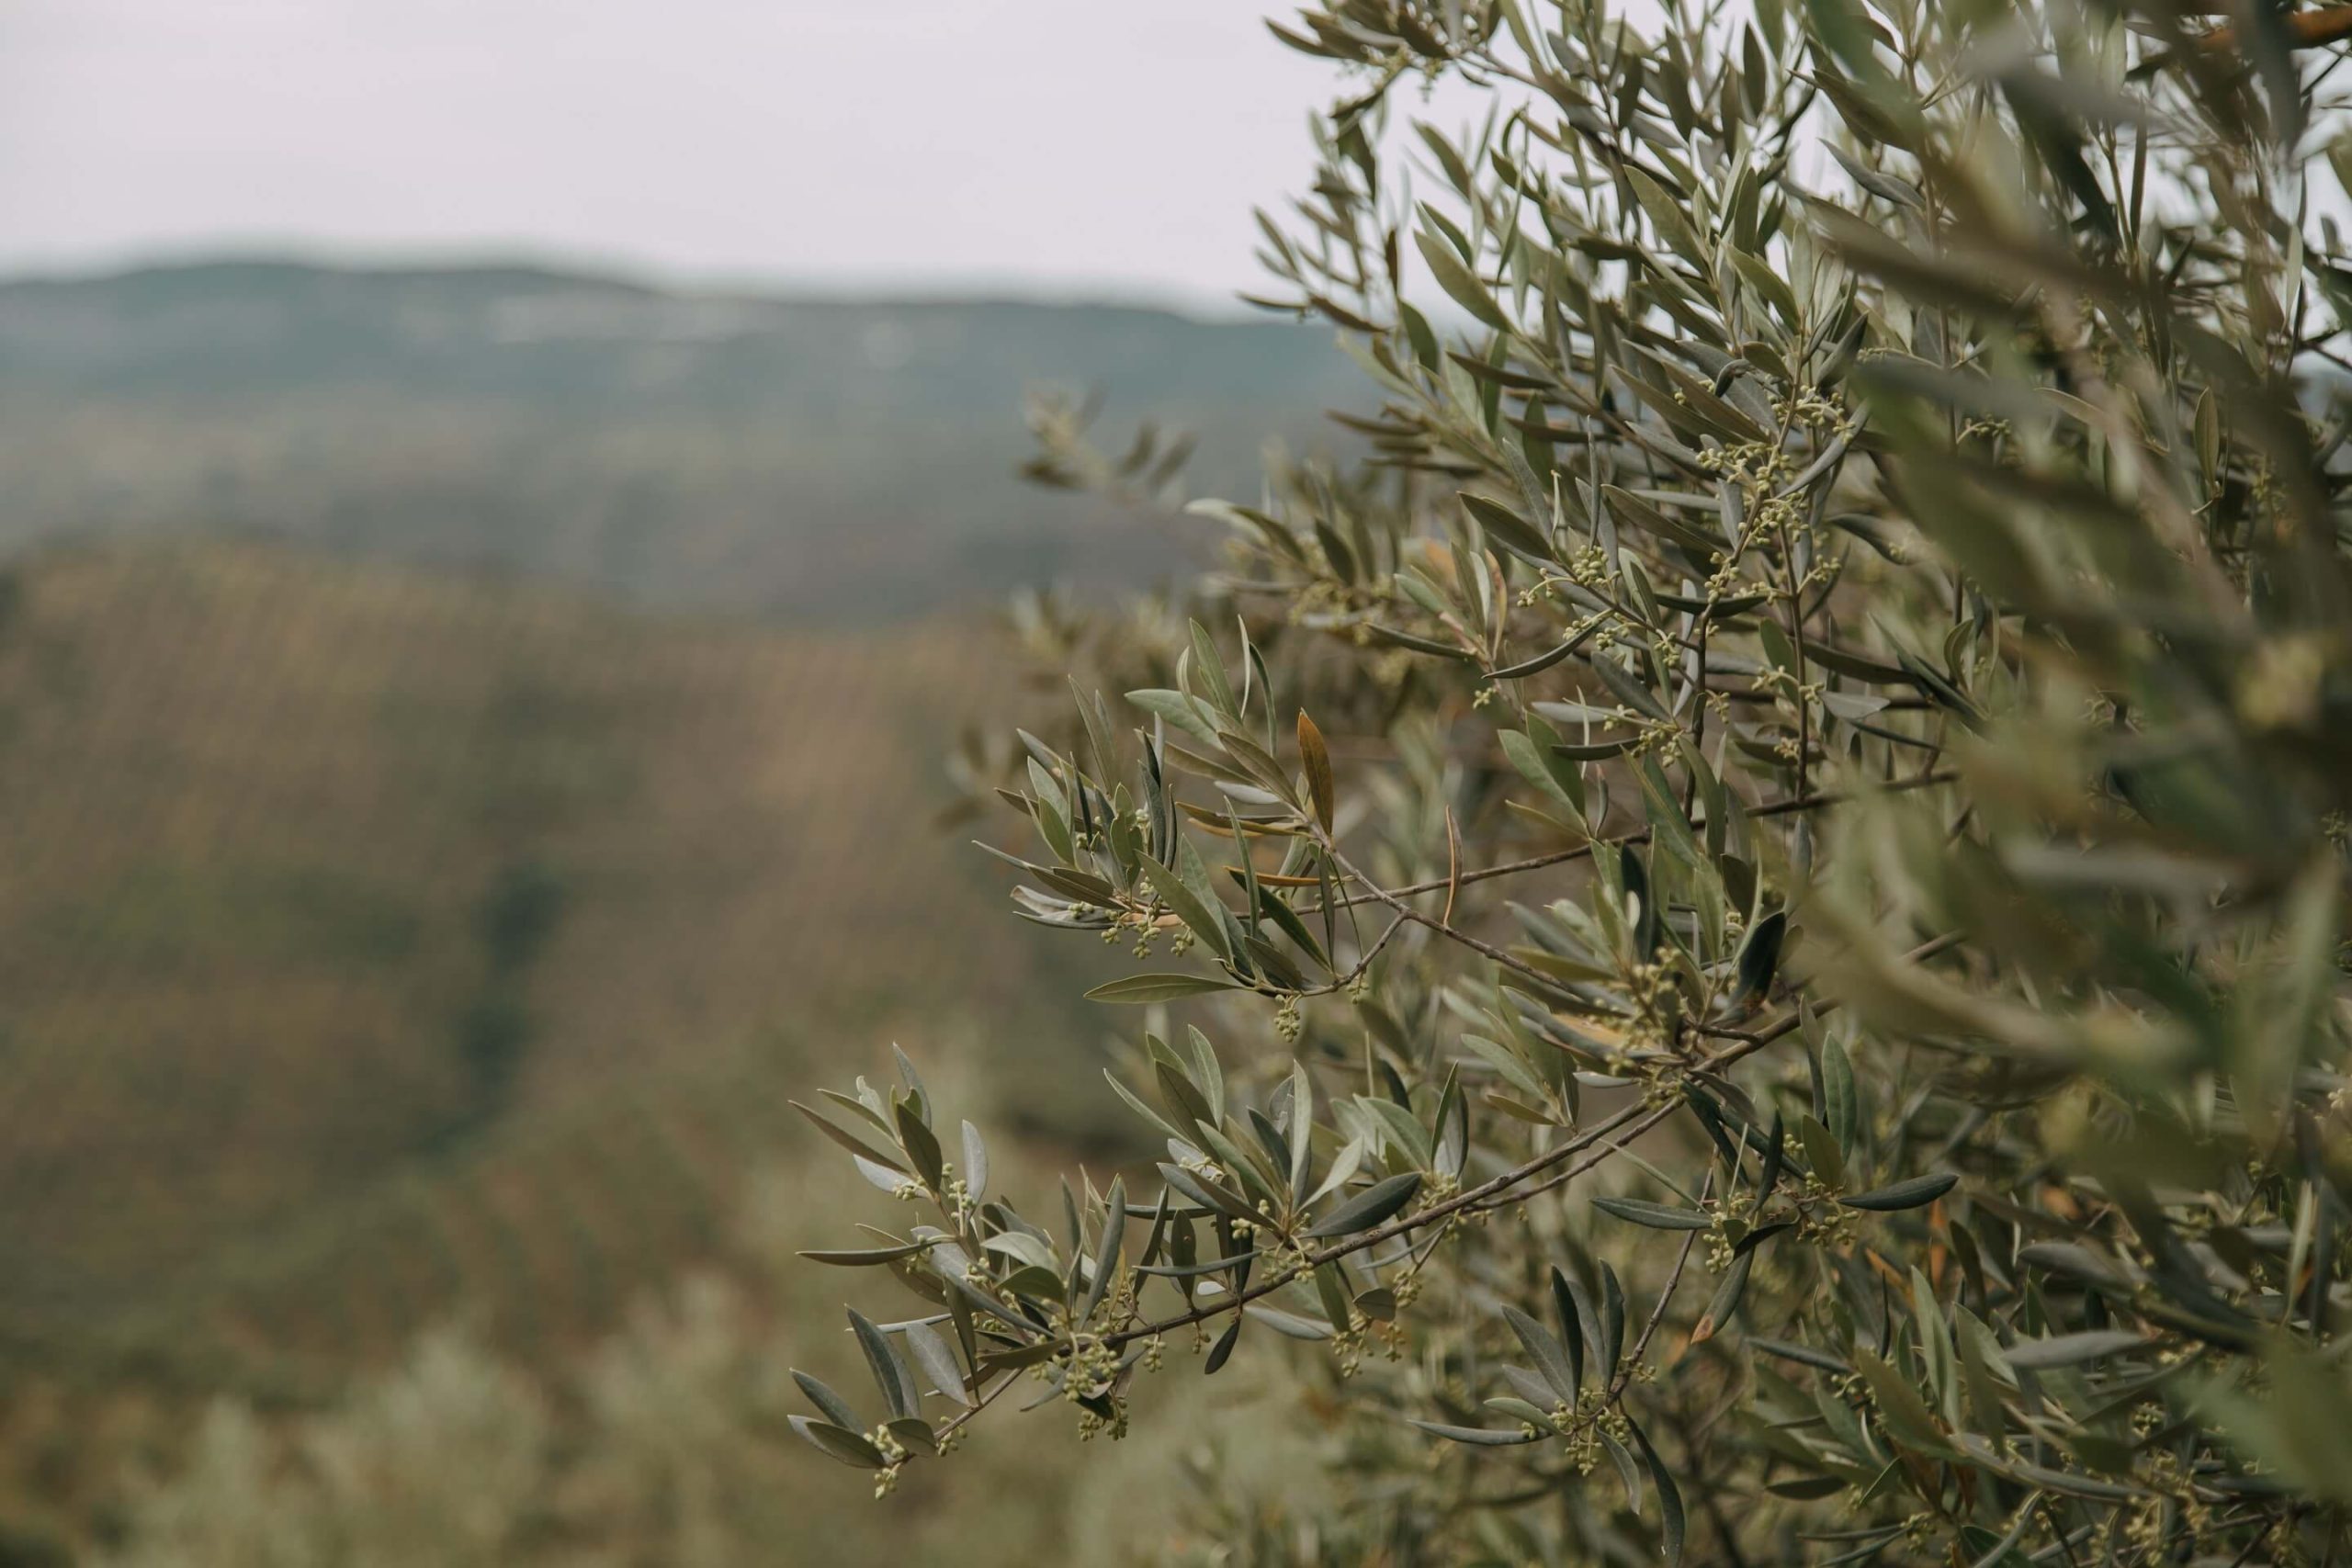 A close-up of an olive tree